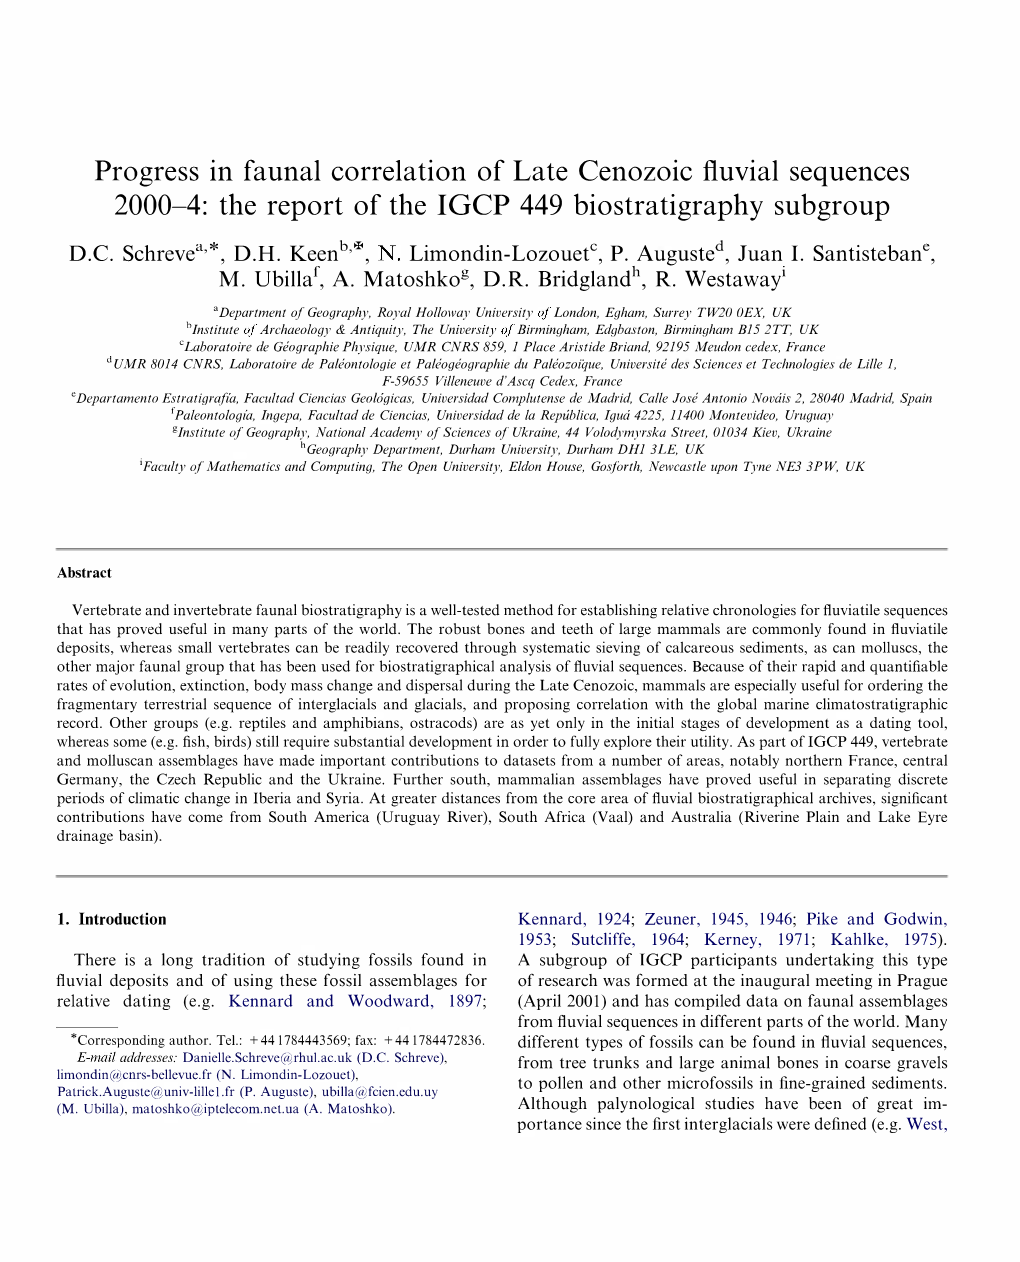 Progress in Faunal Correlation of Late Cenozoic Fluvial Sequences 2000-4: the Report of the IGCP 449 Biostratigraphy Subgroup